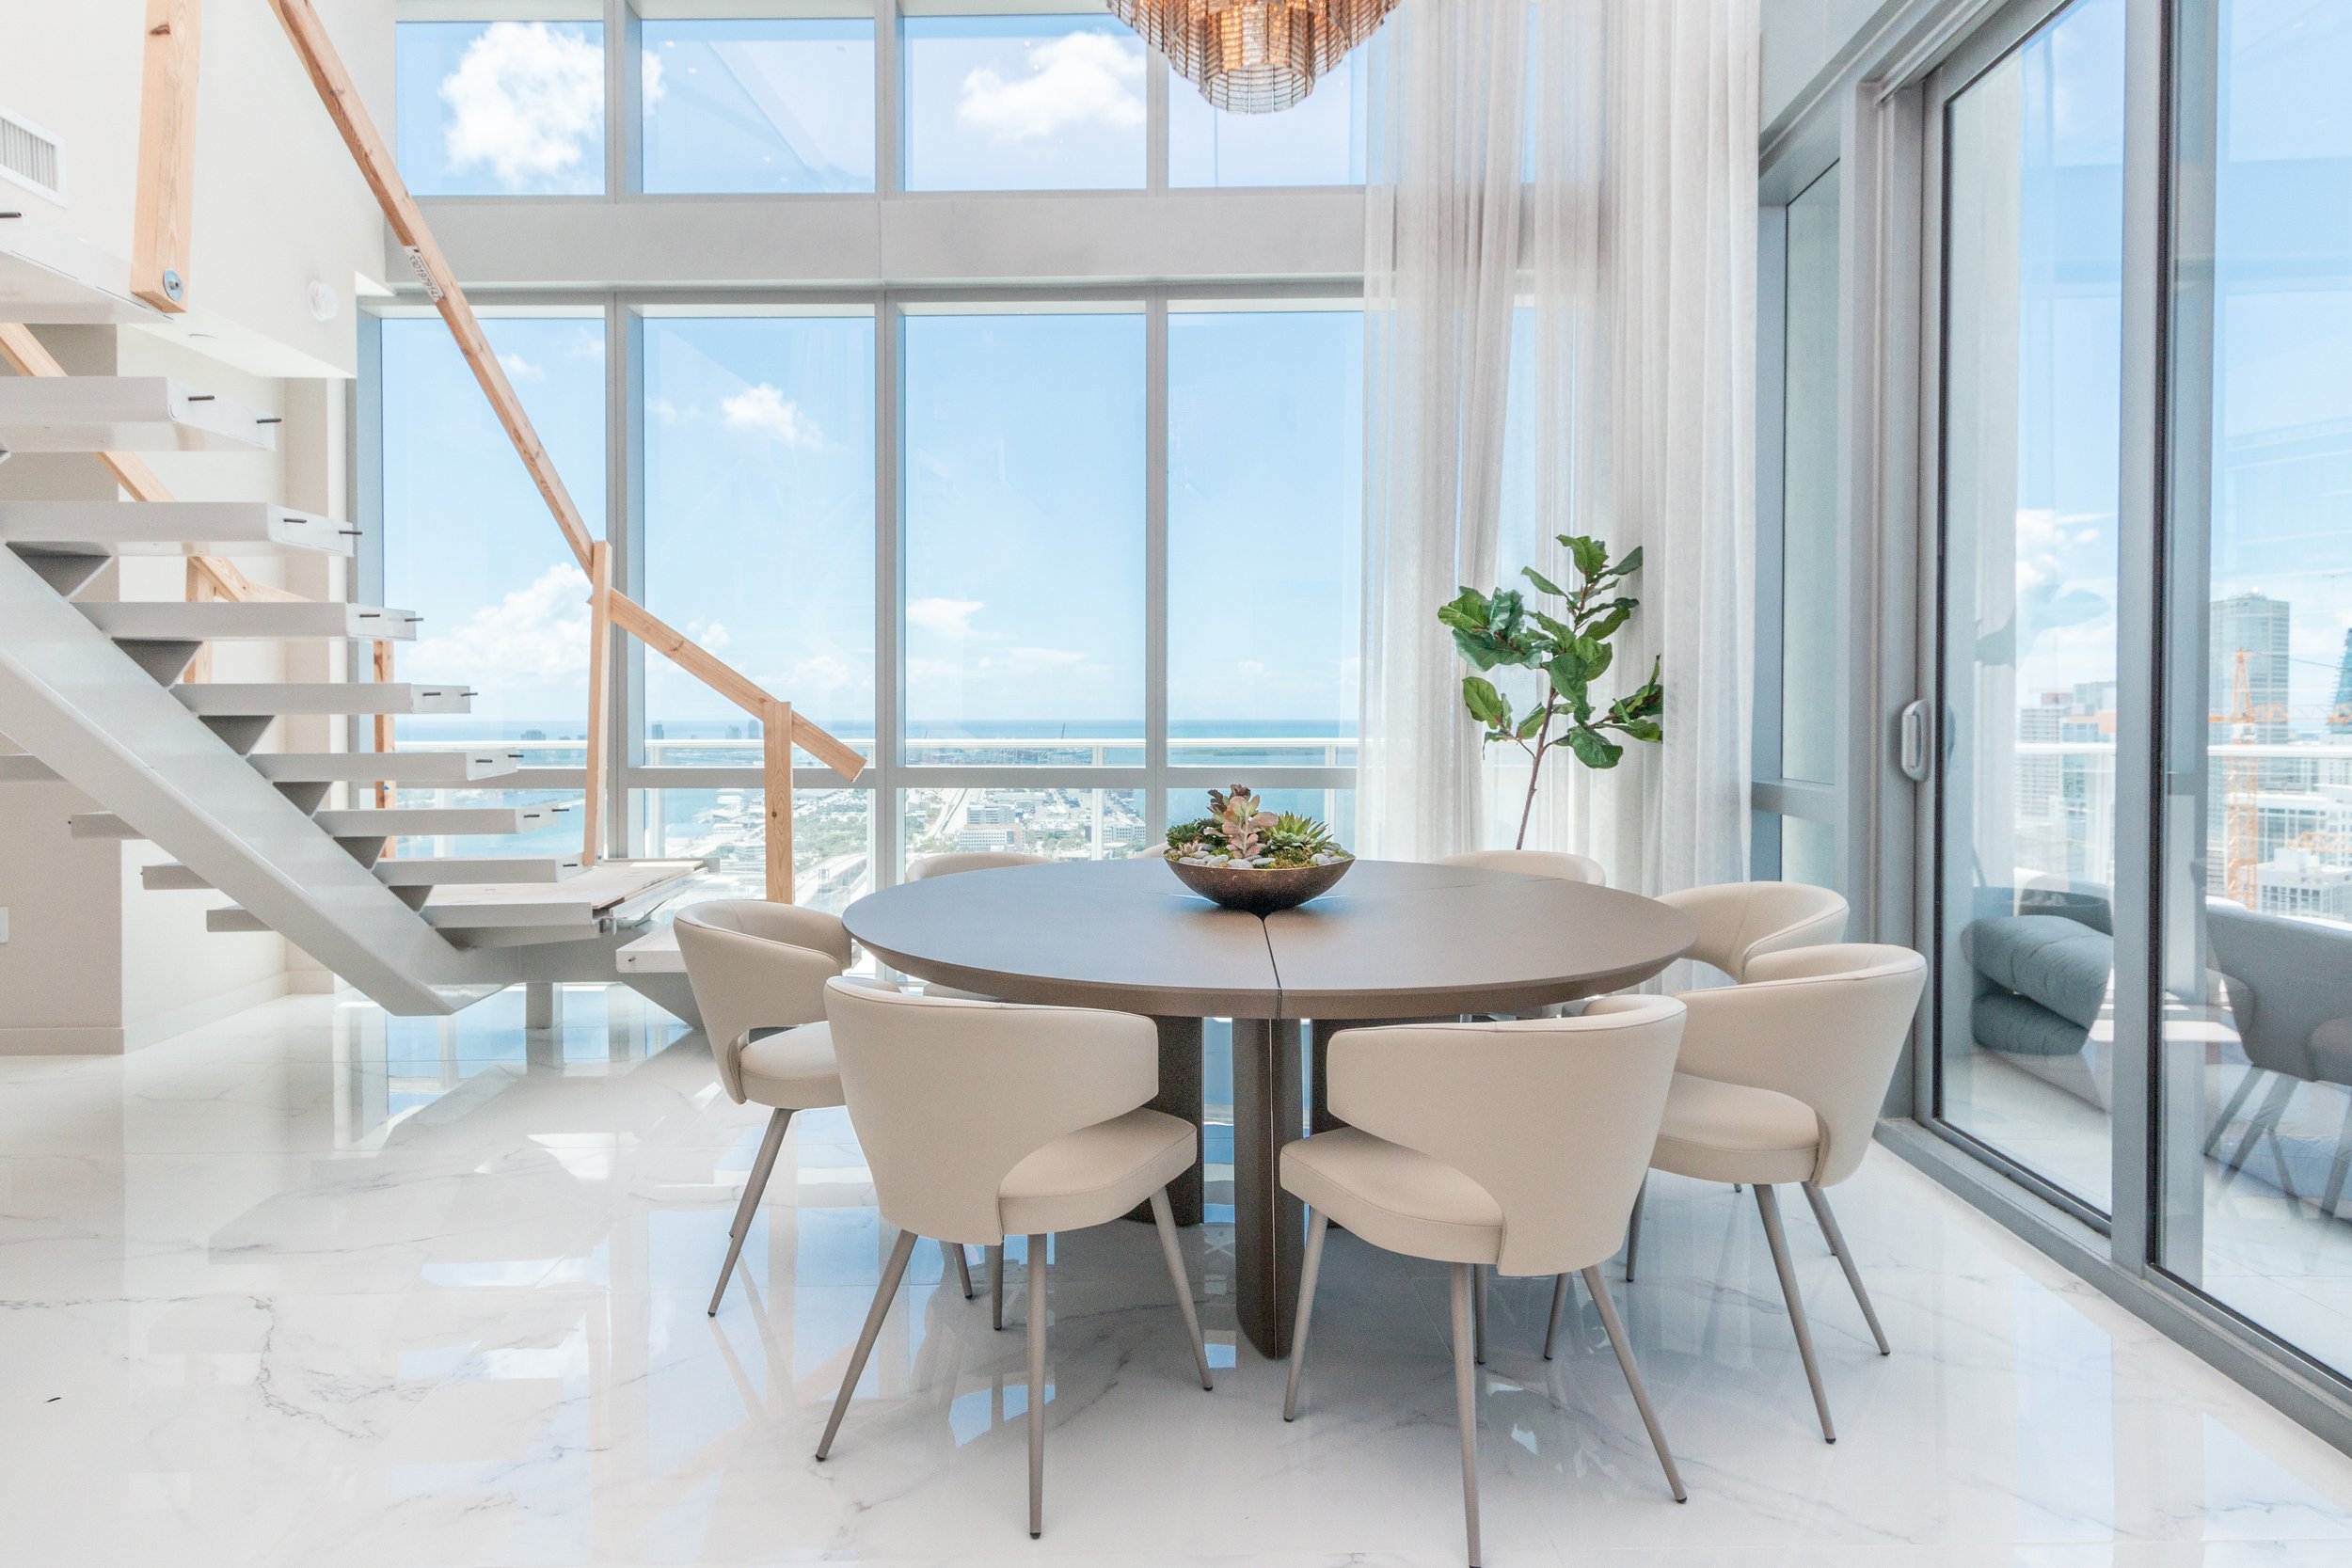 Step Inside A Sky-High Ultra-Luxe Penthouse At PARAMOUNT Miami Worldcenter For Rent Asking $40K Per Month ALTARA Properties Scott Lawrence Porter 1.25.jpg